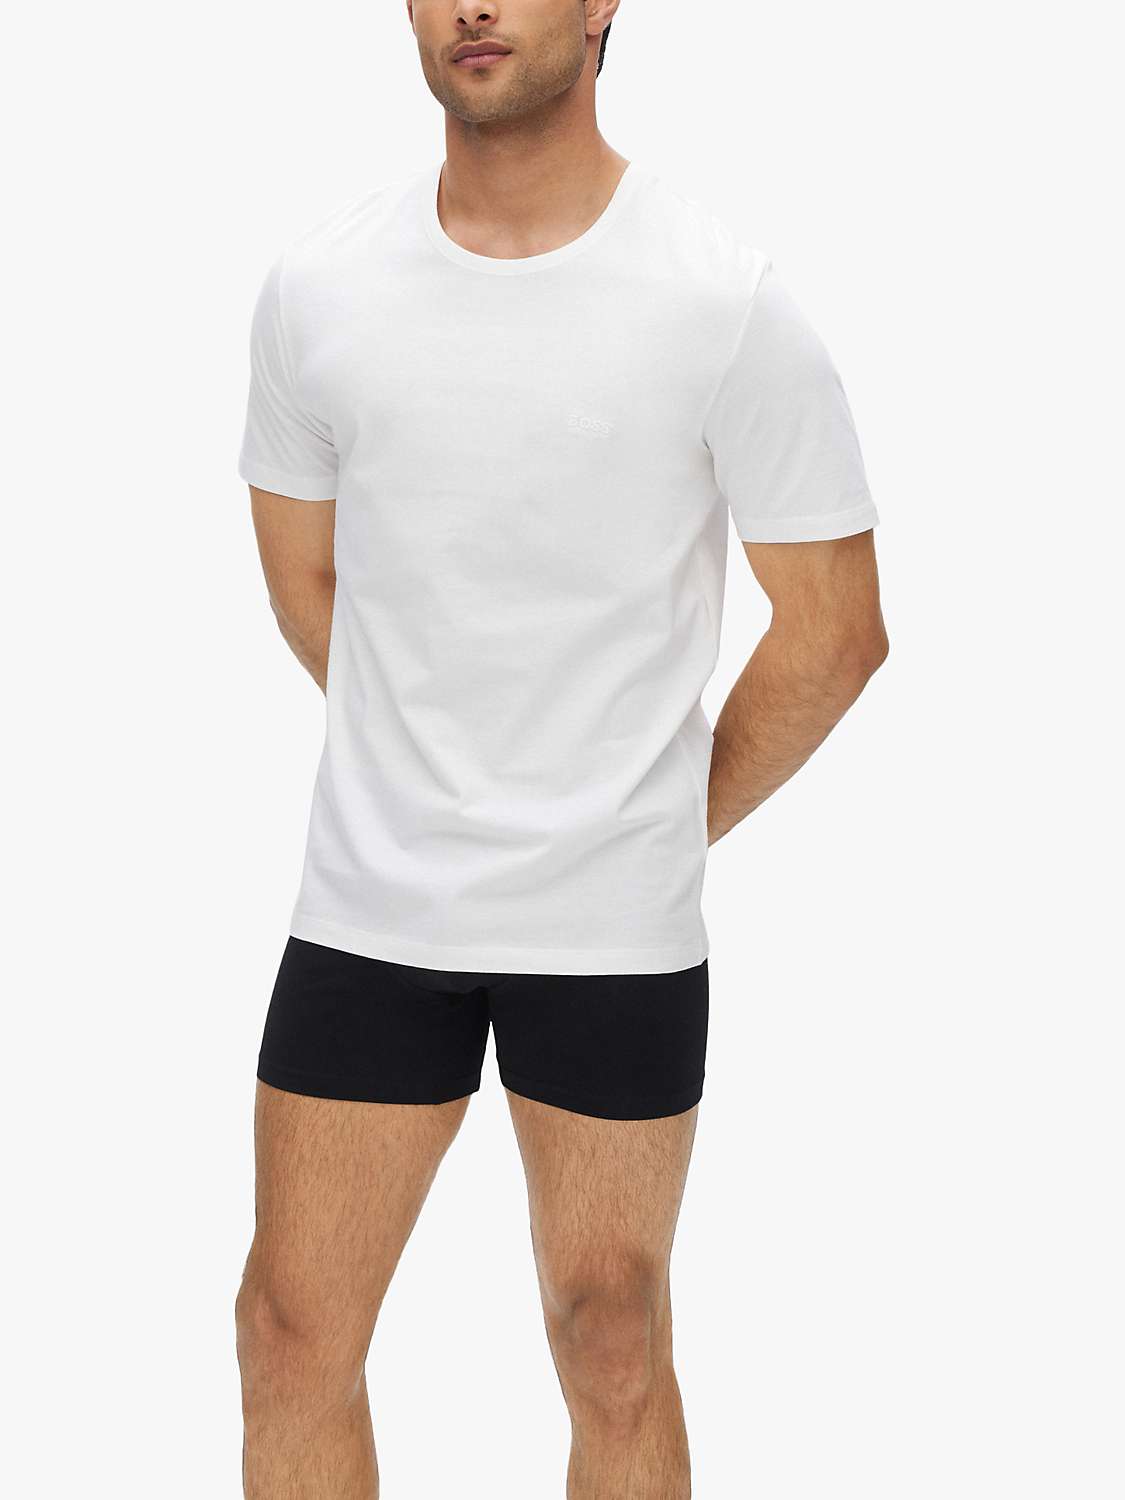 Buy BOSS Cotton Crew Neck Lounge T-Shirts, Pack of 3 Online at johnlewis.com